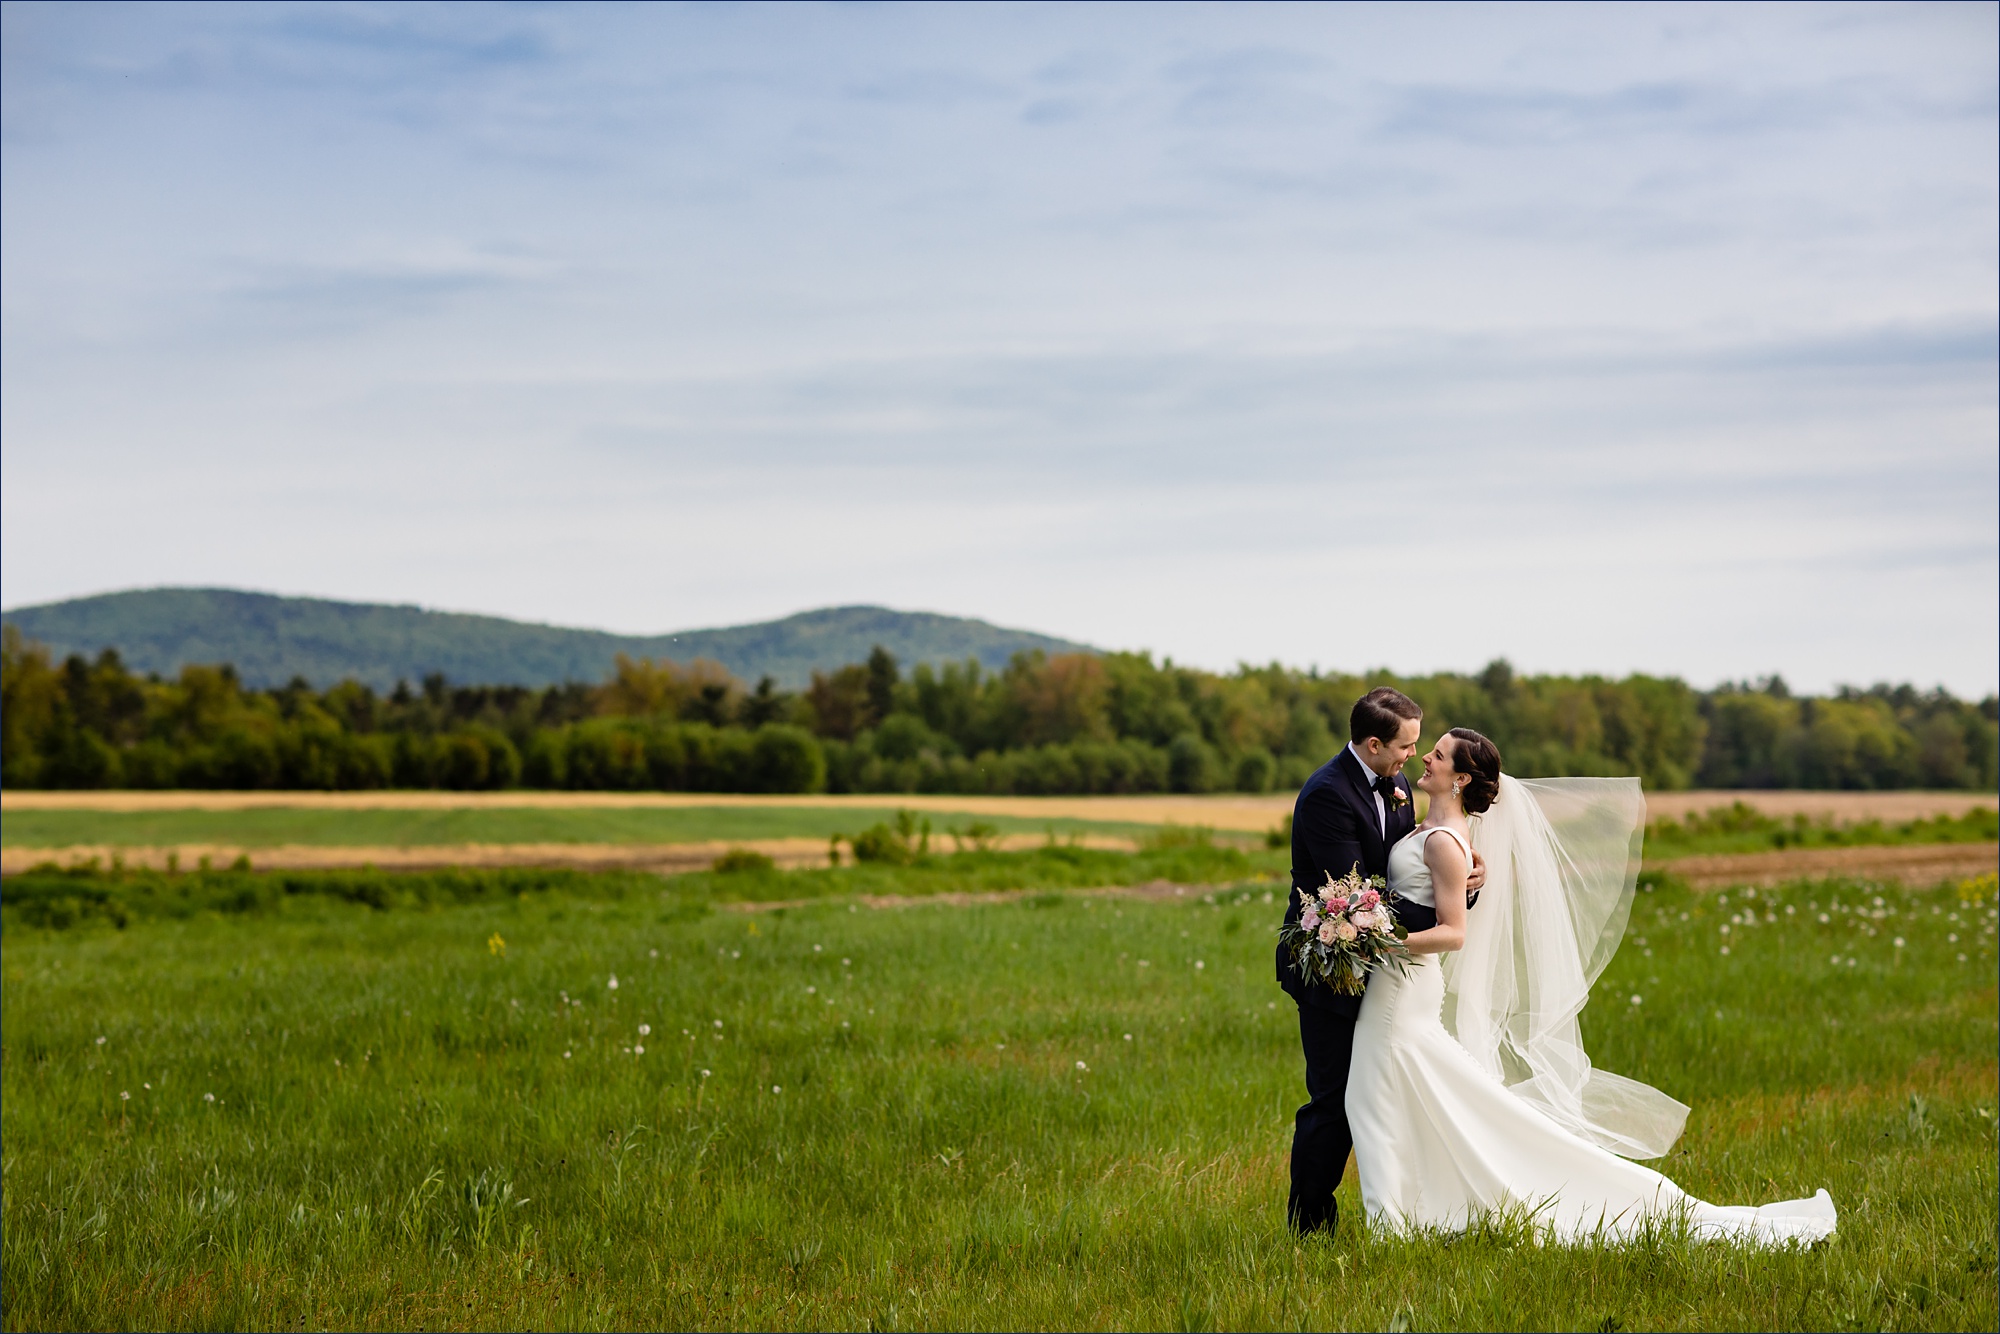 Hardy Farm wedding in Maine where the couple seals the deal with a kiss in front of the White Mountains